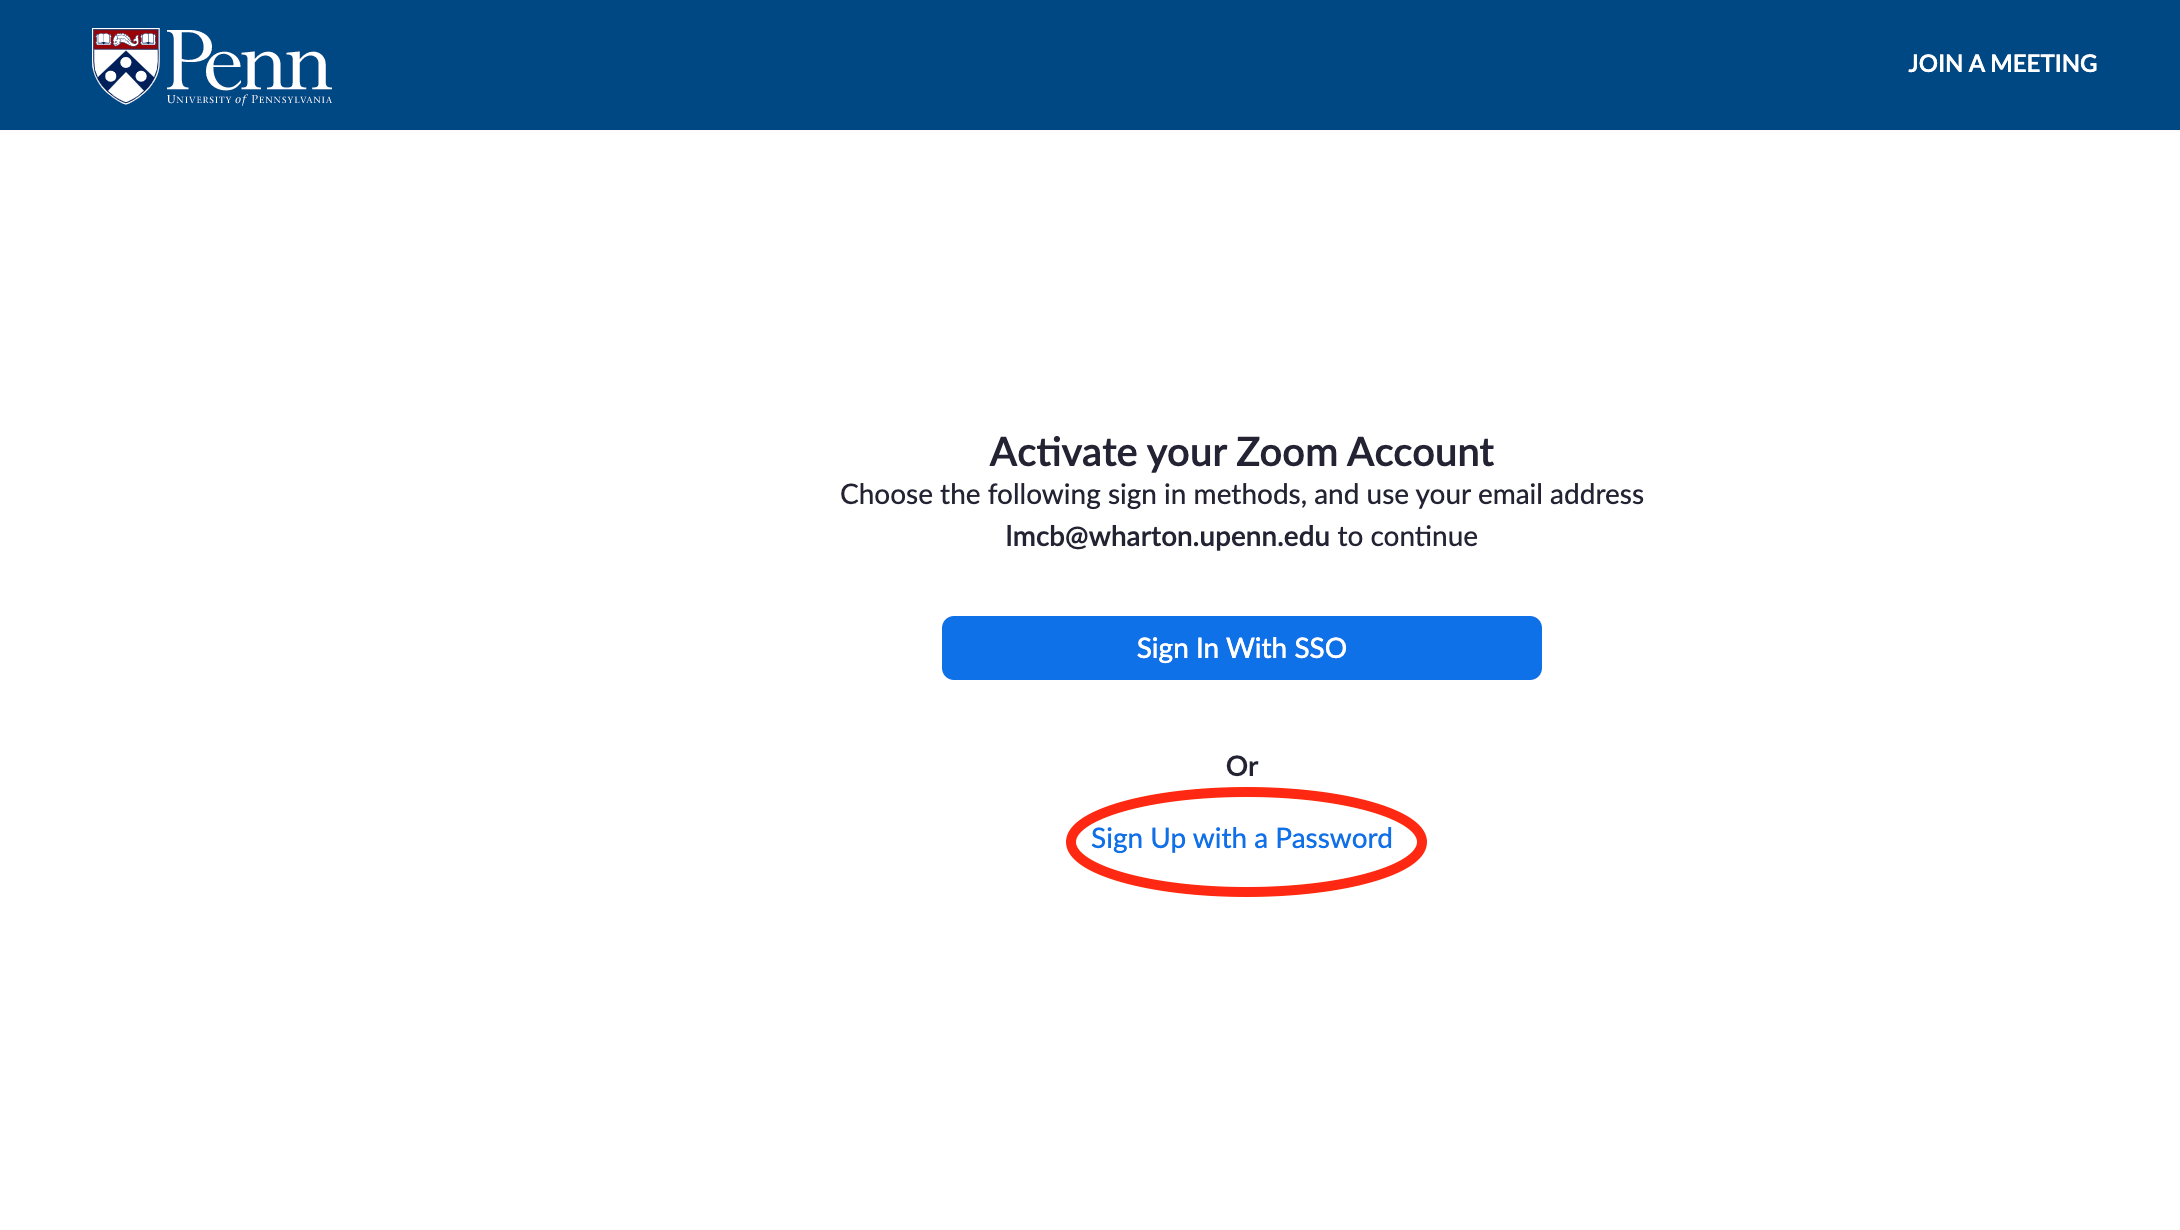 The Activate your Zoom Account with 